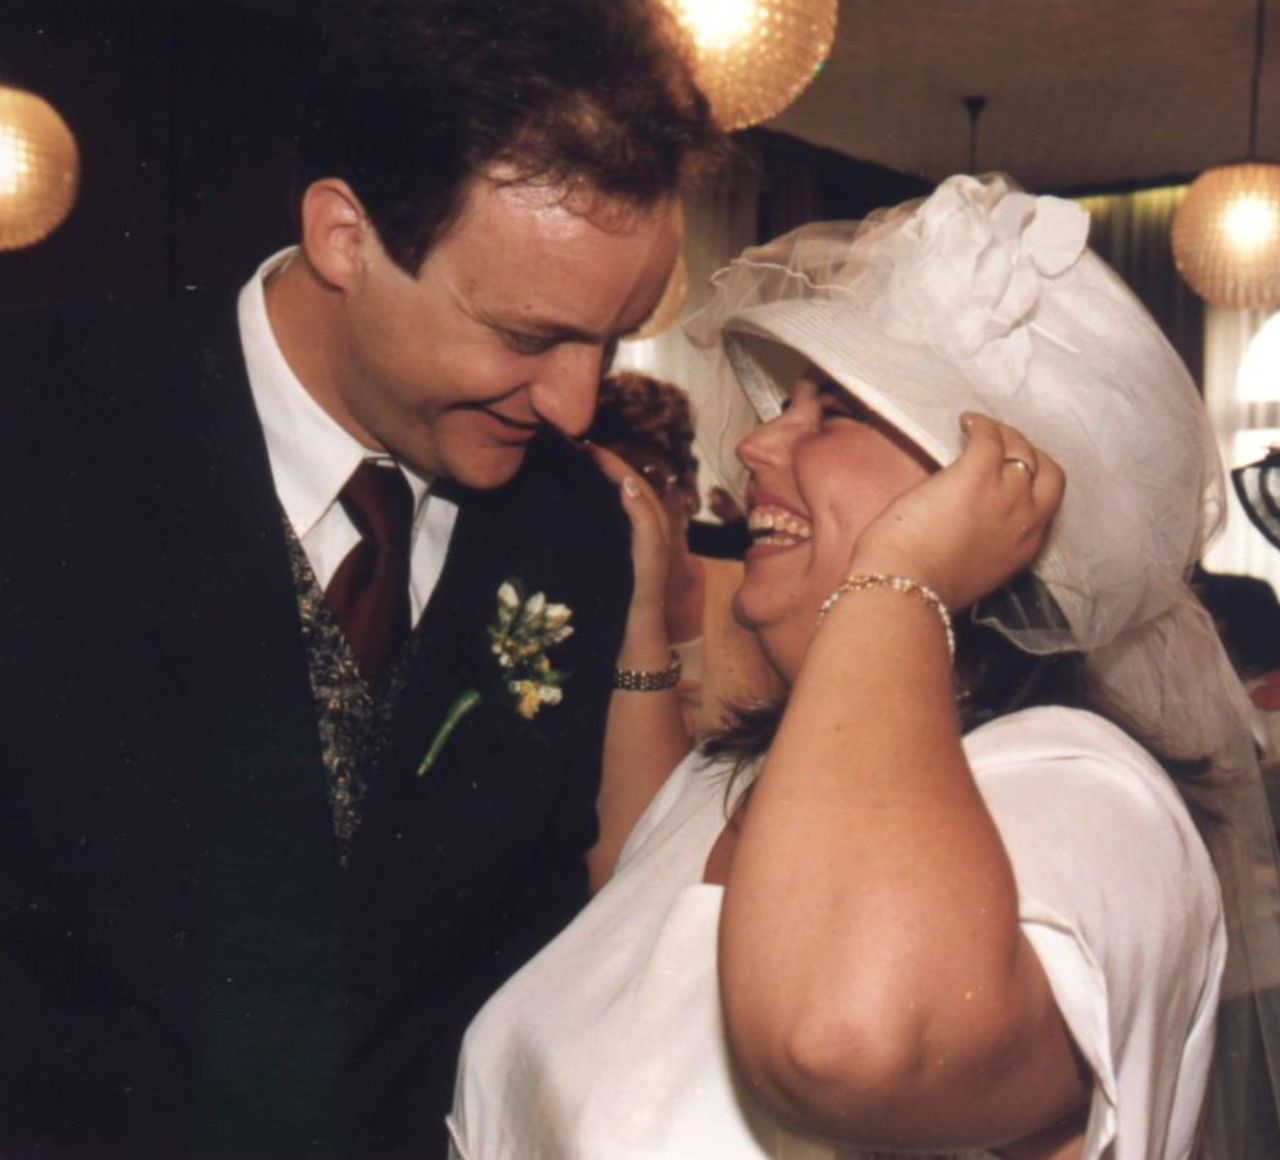 Frederika and Simon at their wedding in Luxembourg in August 1996